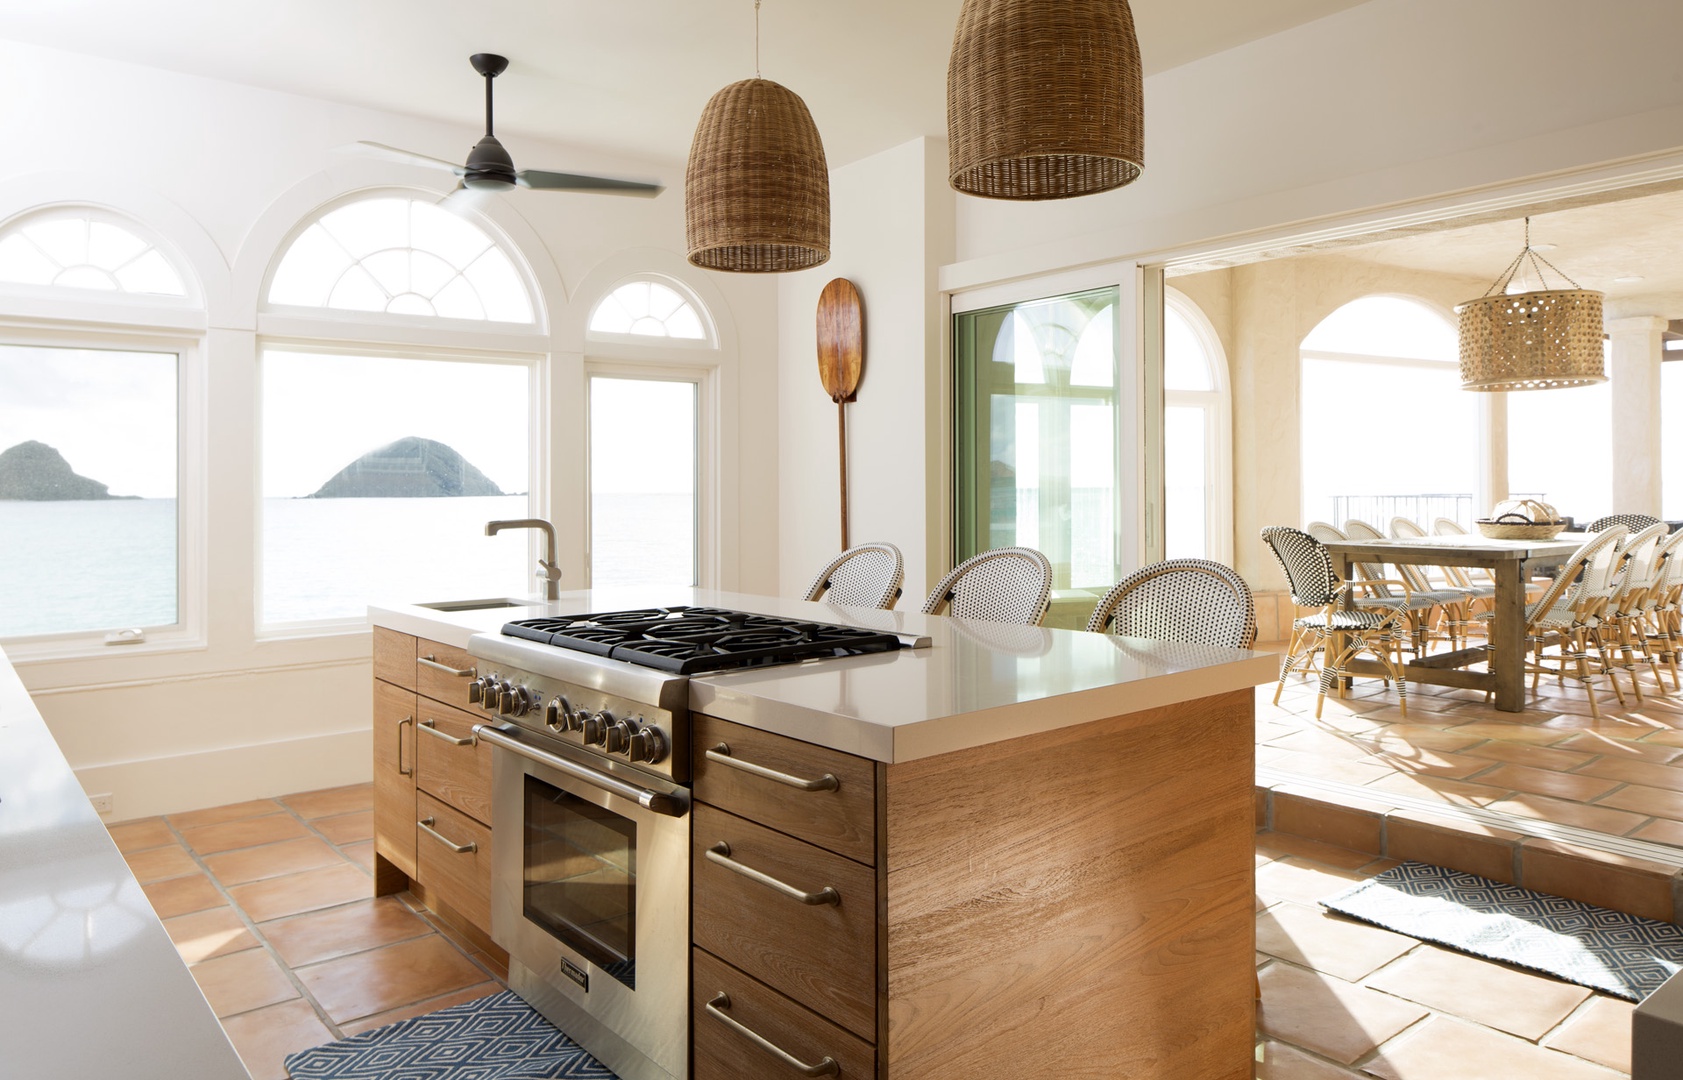 Kailua Vacation Rentals, The Villa at Wailea Point* - Modern and classic styles meet in this kitchen with a view.